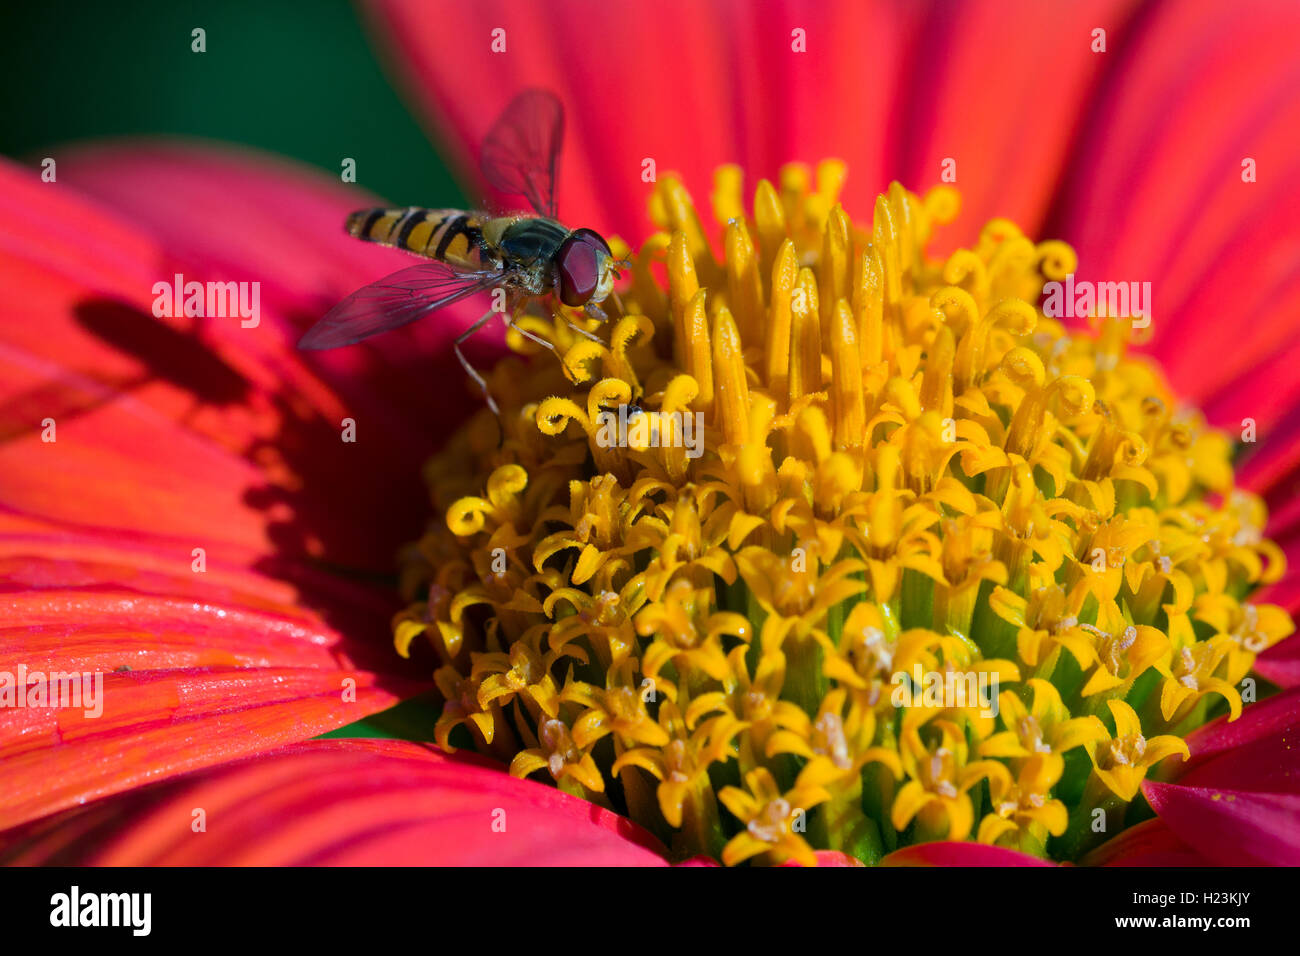 Common Hoverfly (Eupeodes corollae) is collecting nectar from a red yellow flower blossom, Saxony, Germany Stock Photo